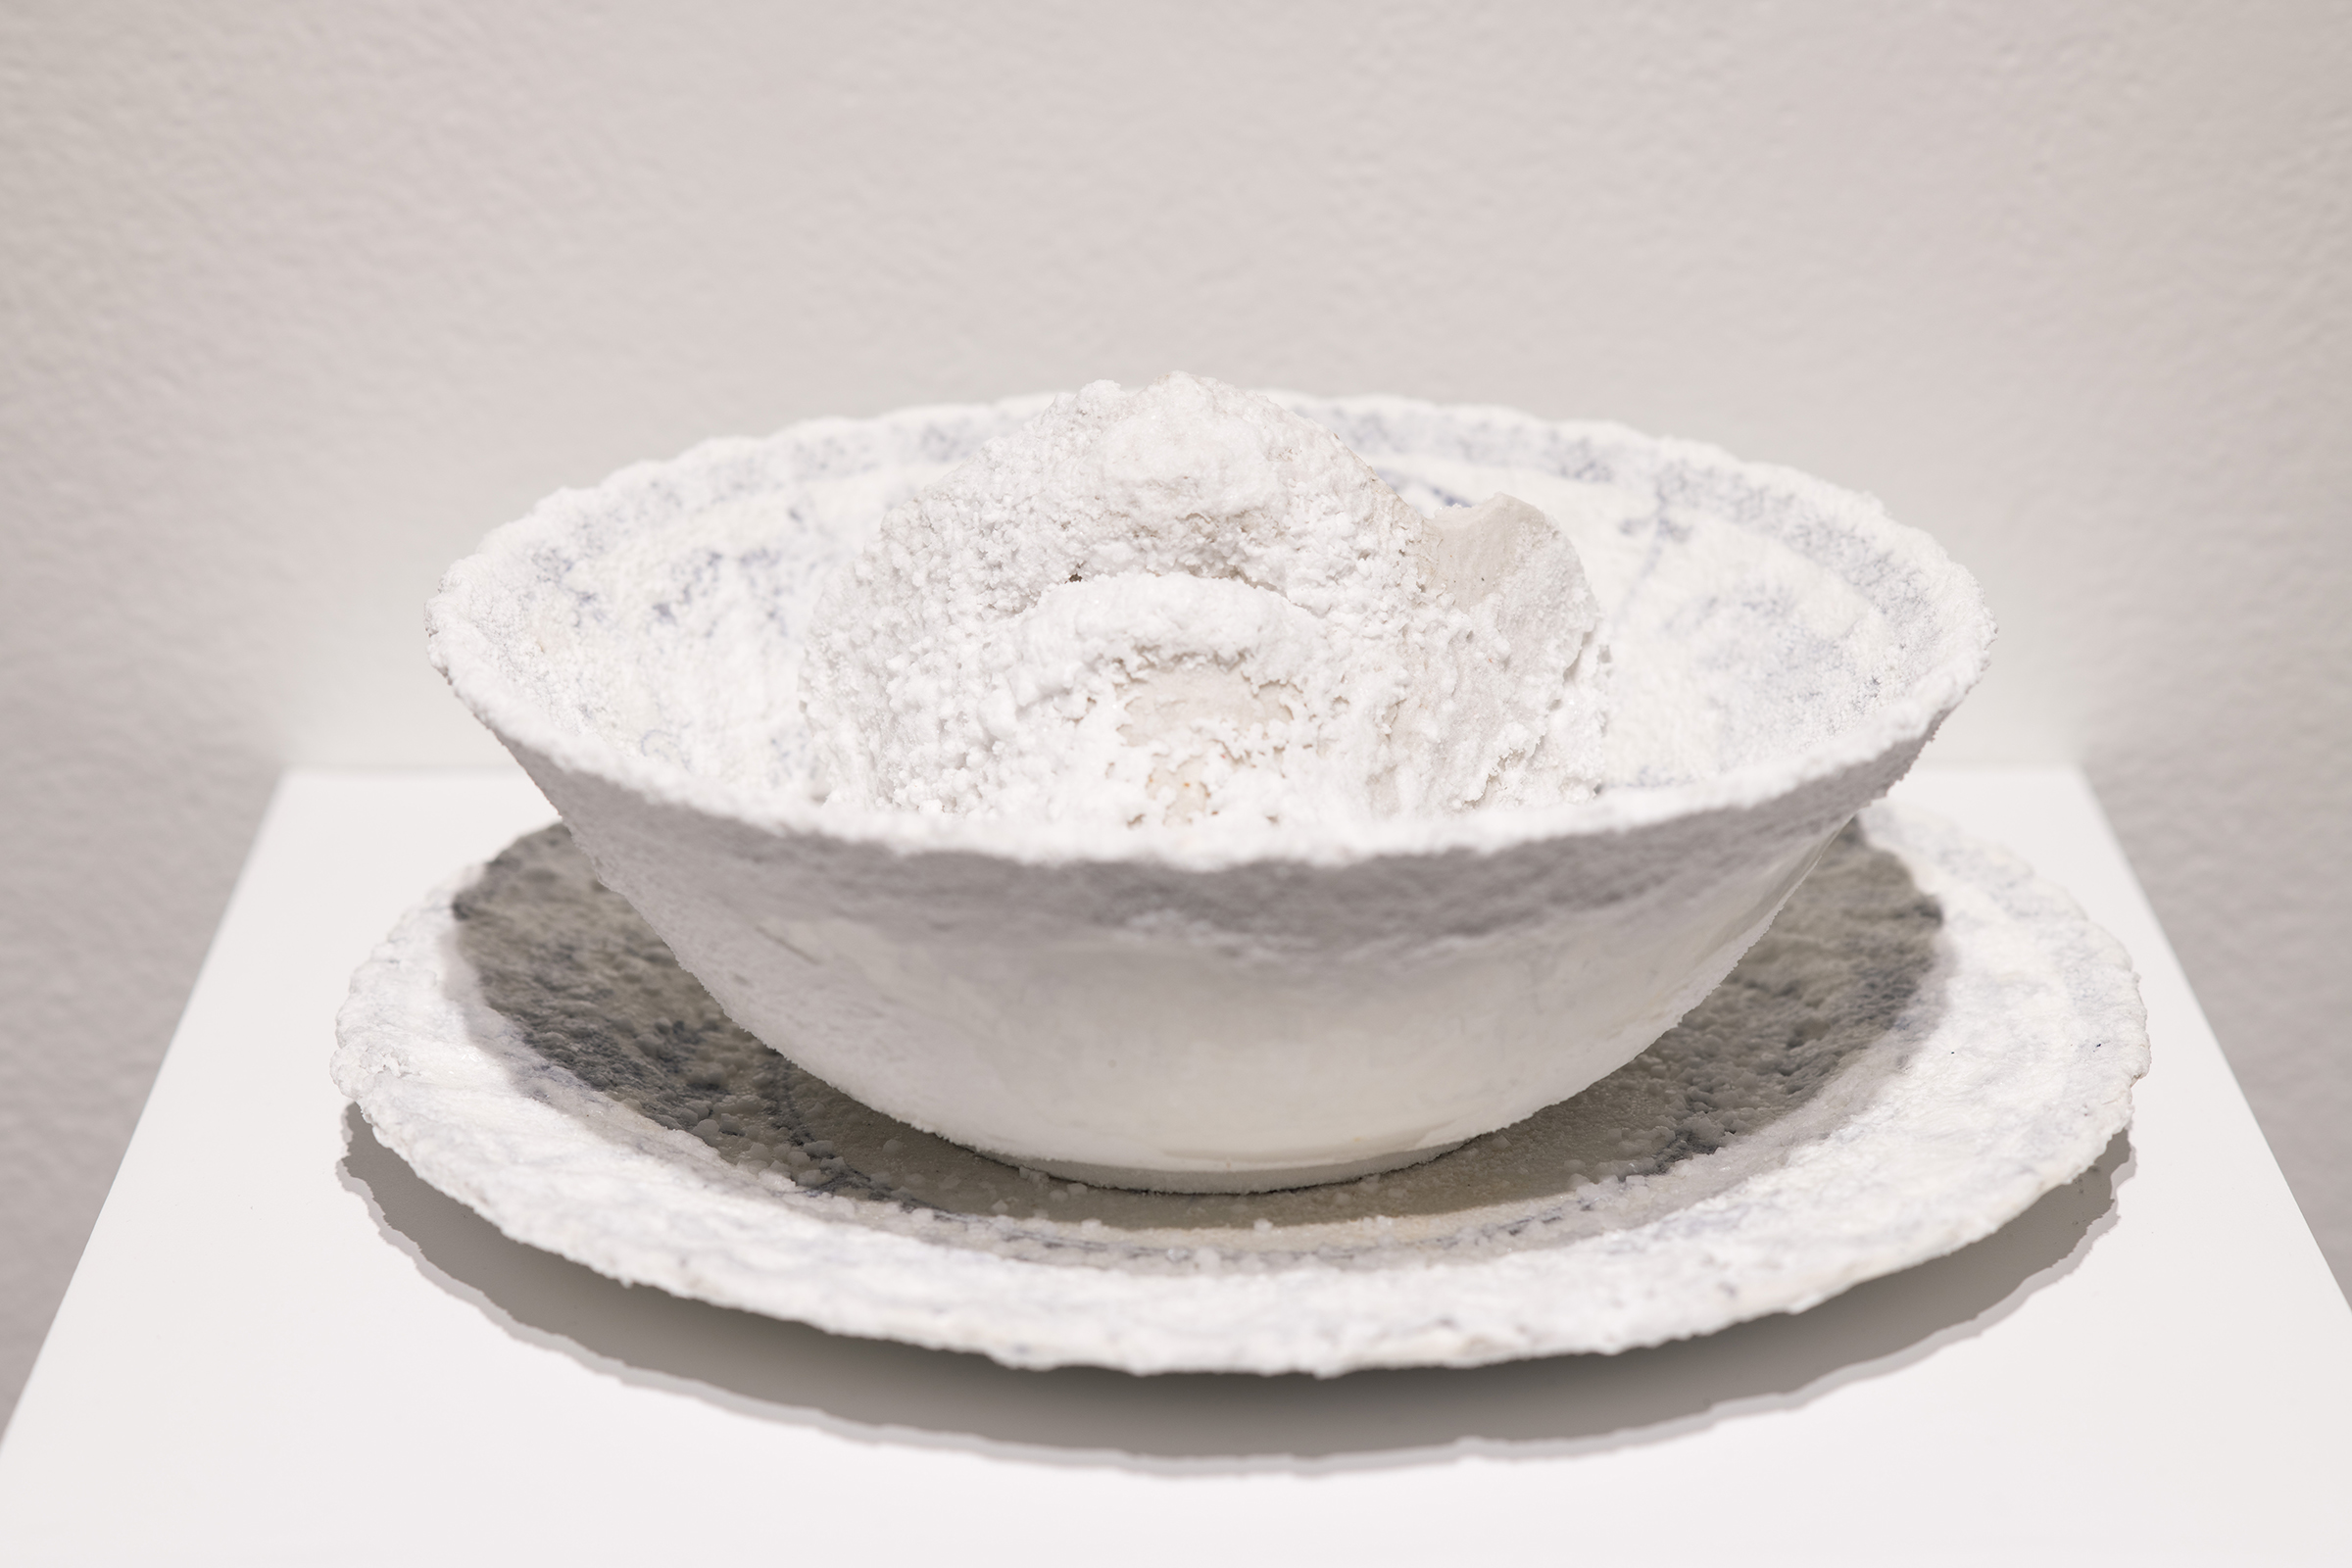 I was going to plead my case detail, Plaster cast of artist’s face, kosher salt, fiberboard, bowl and plate from artist’s childhood home by Kel Mur. Photography by Kyle Herrera.